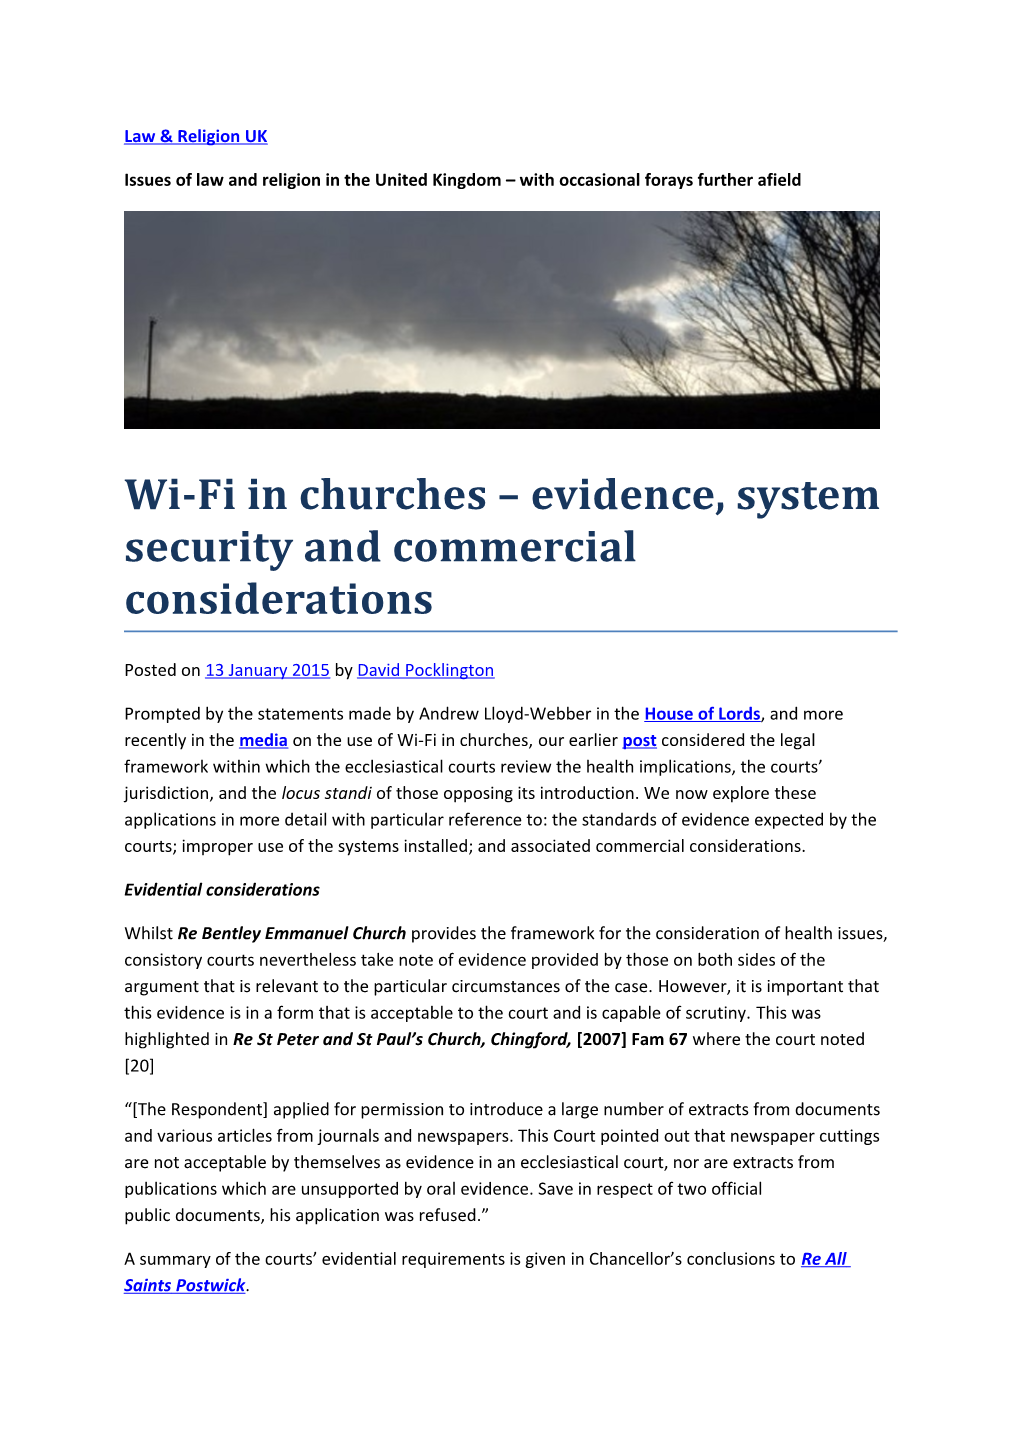 Wi-Fi in Churches Evidence, System Security and Commercial Considerations